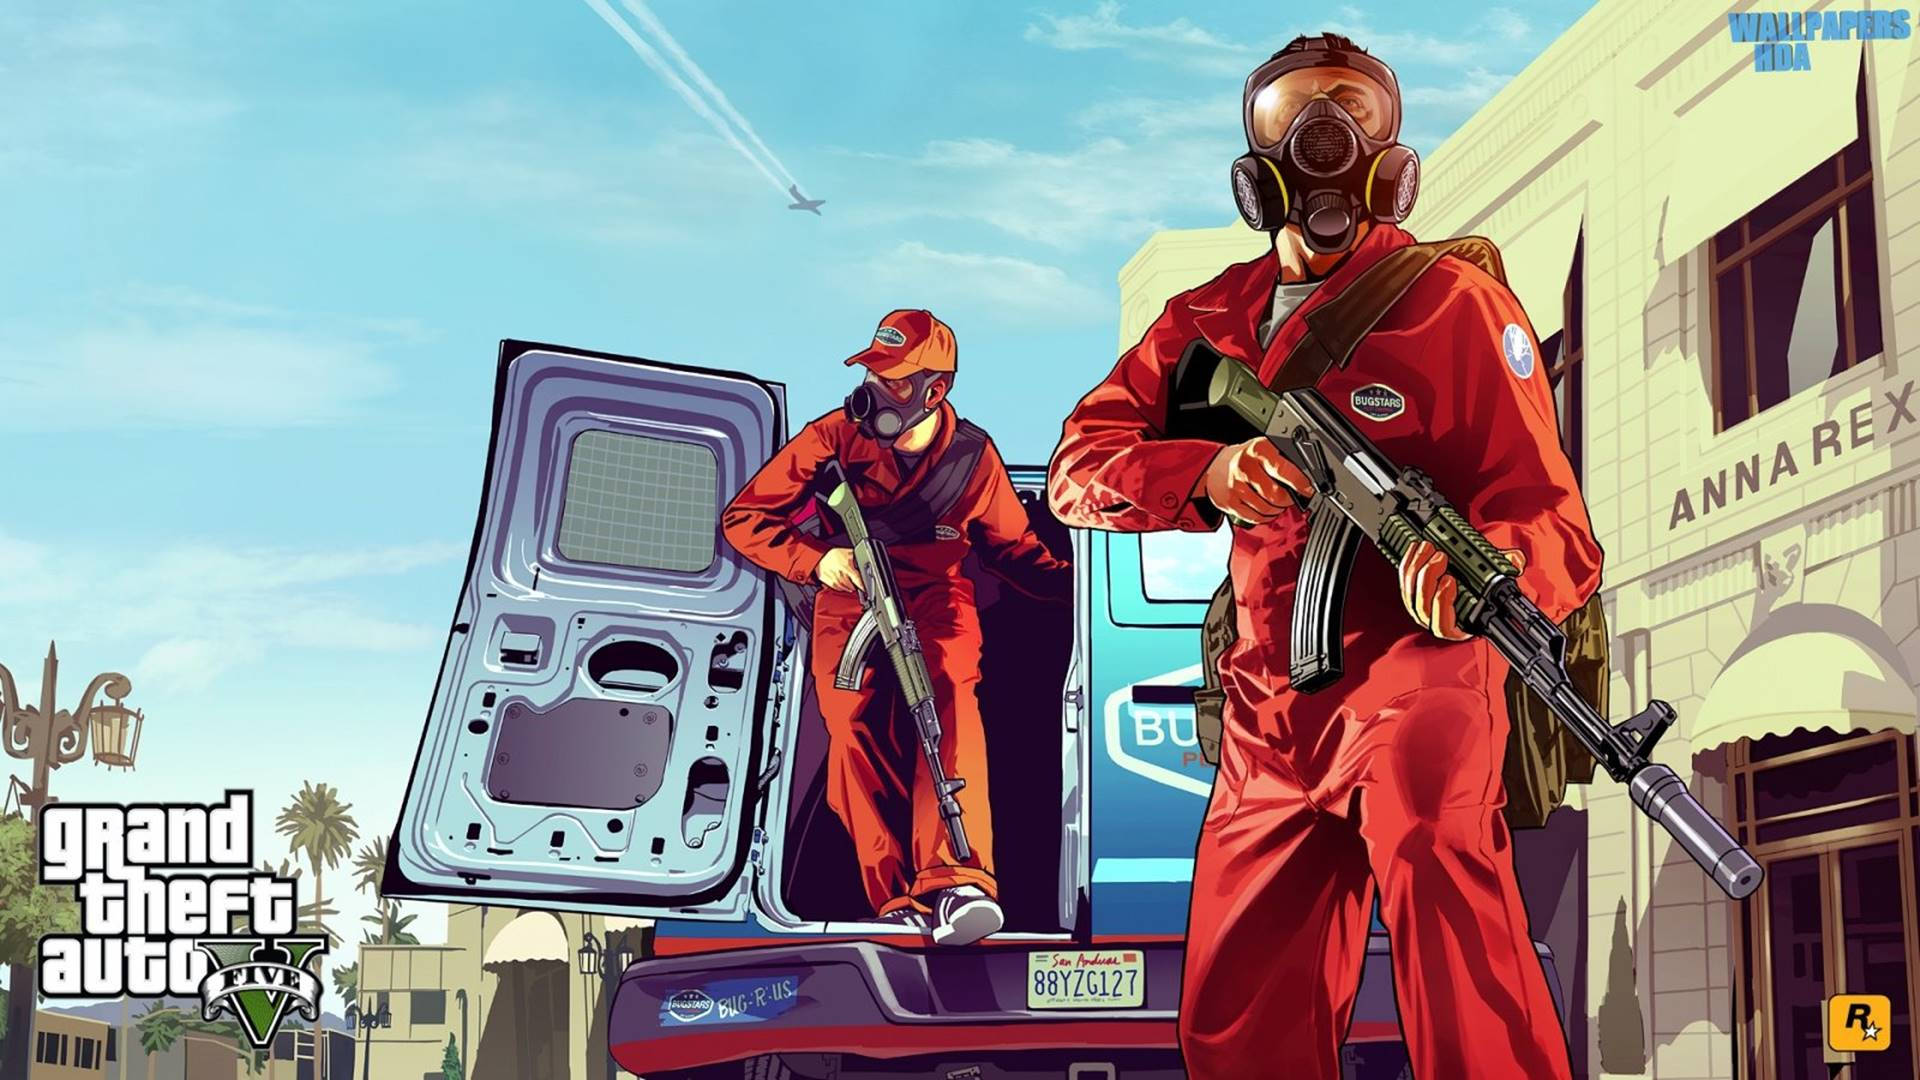 500 Grand Theft Auto V HD Wallpapers and Backgrounds